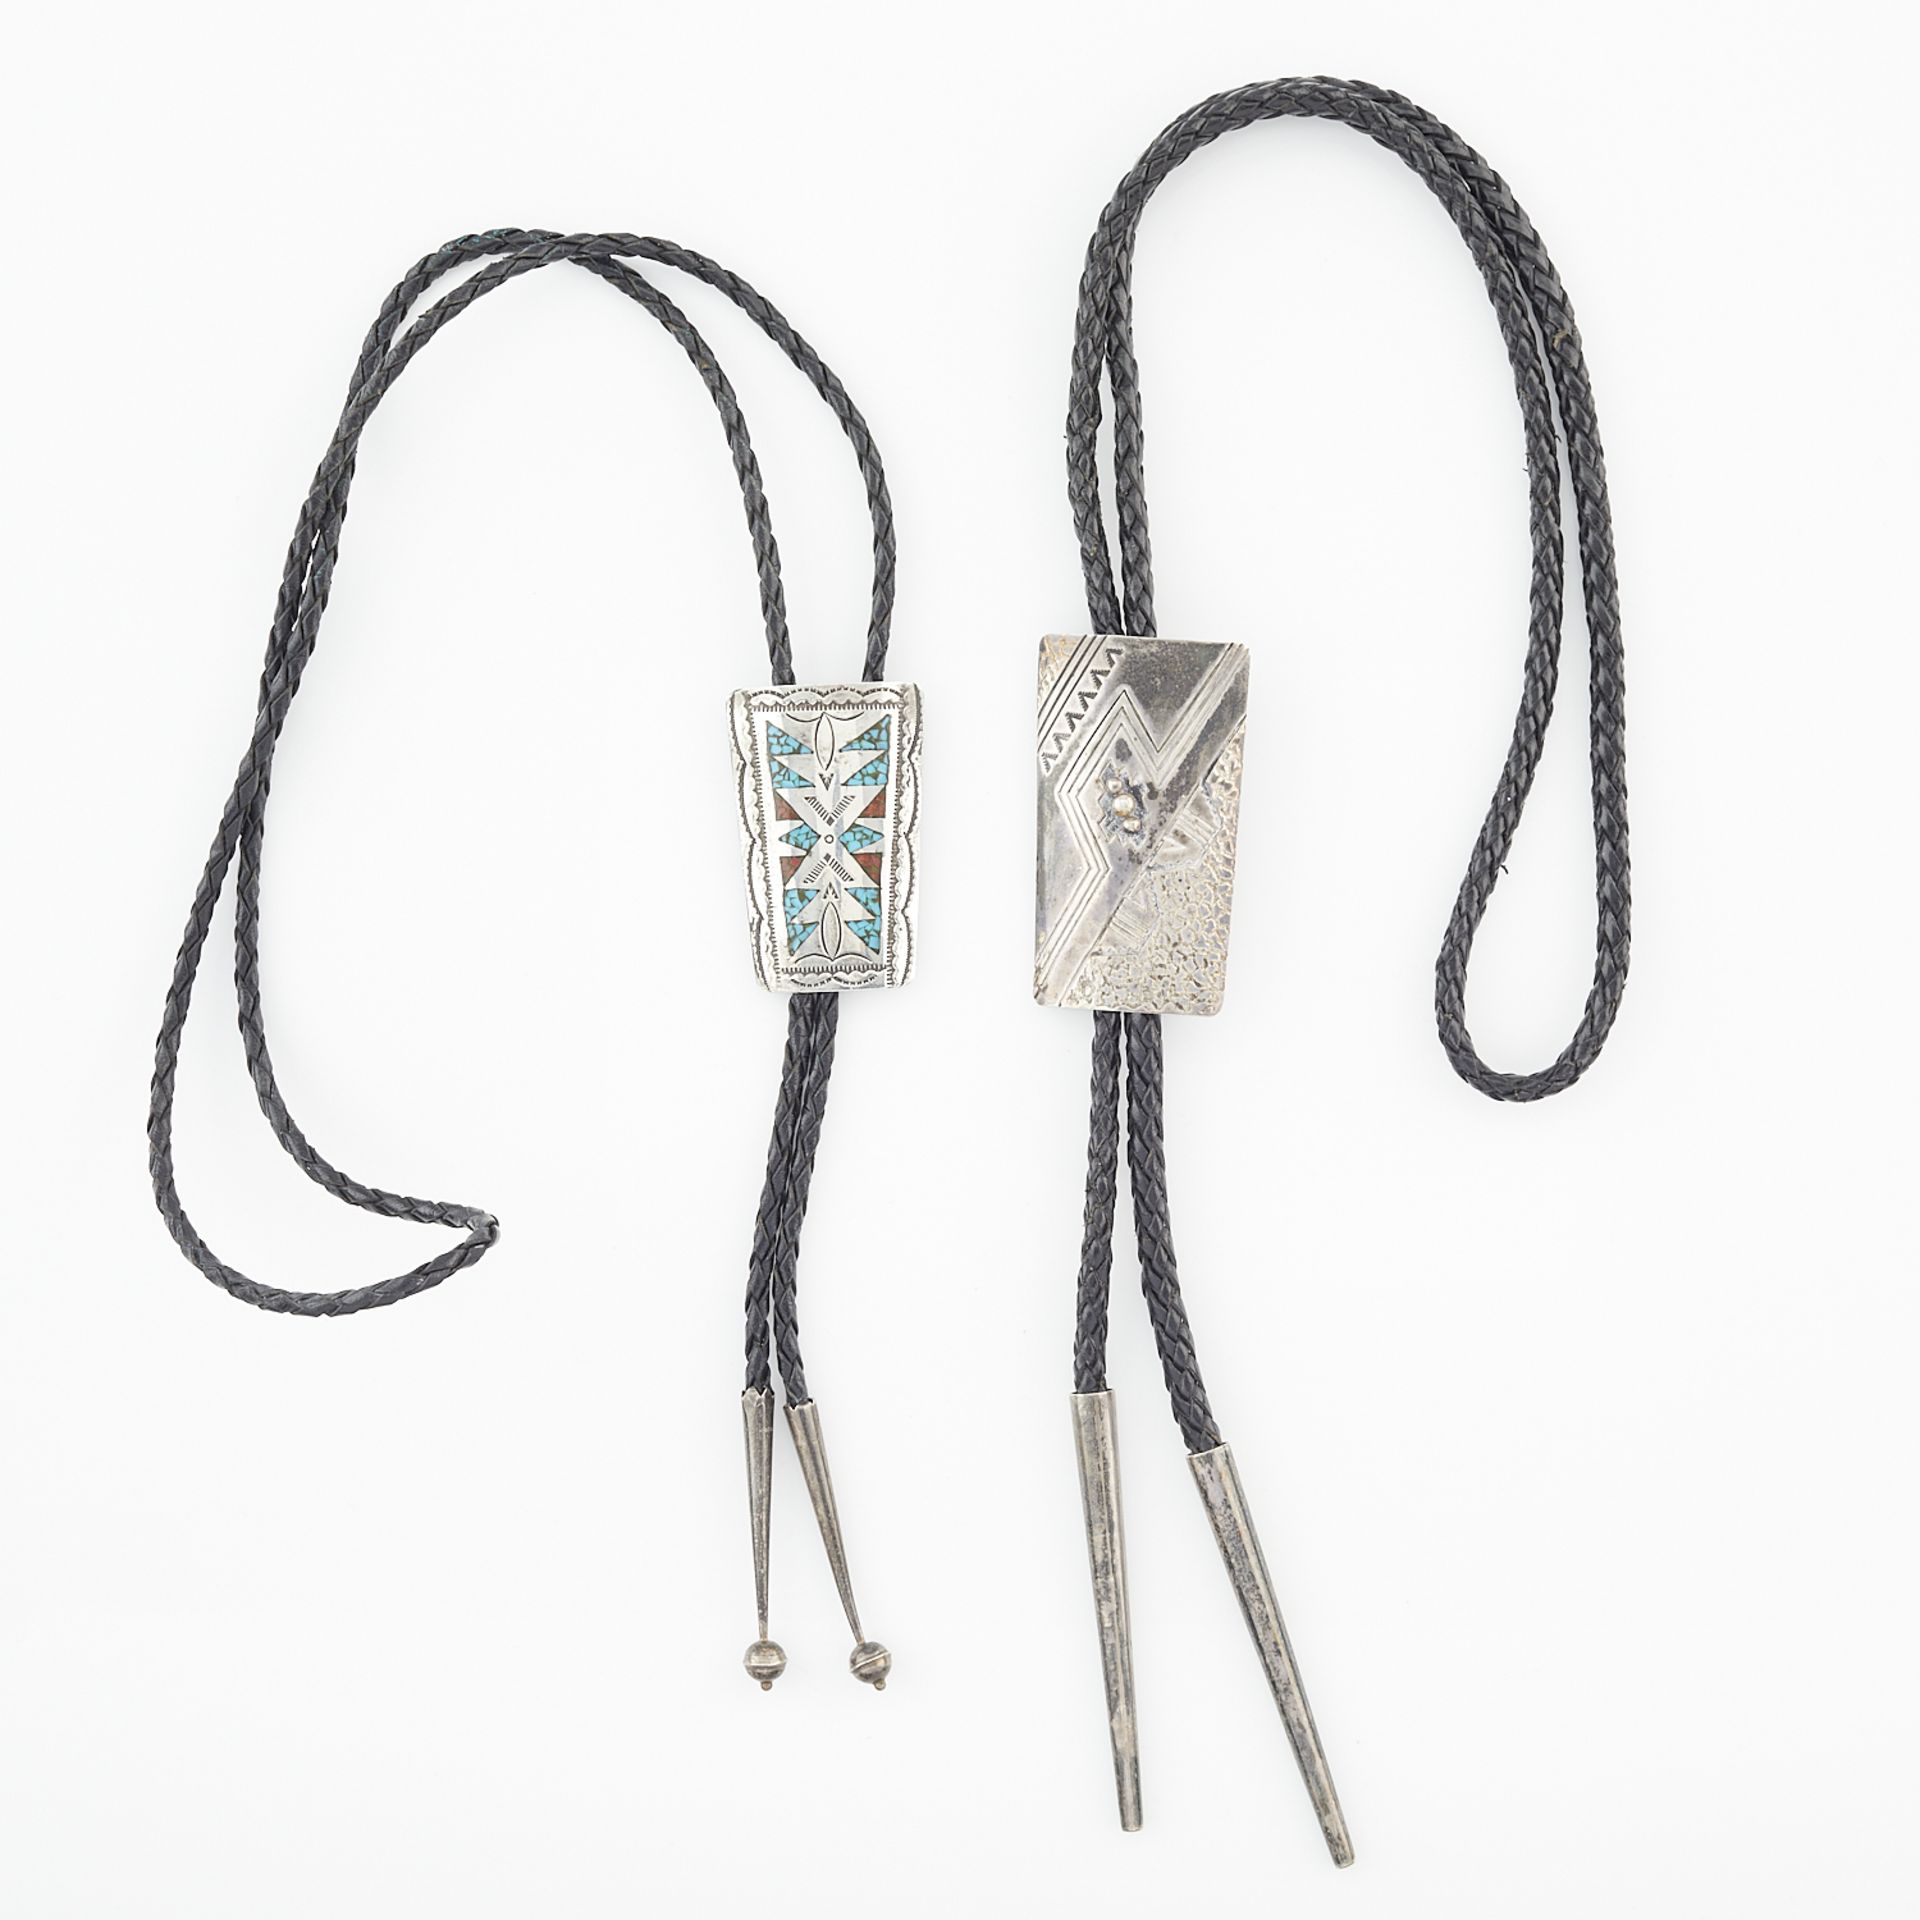 2 Southwest Bolo Ties - Image 4 of 13